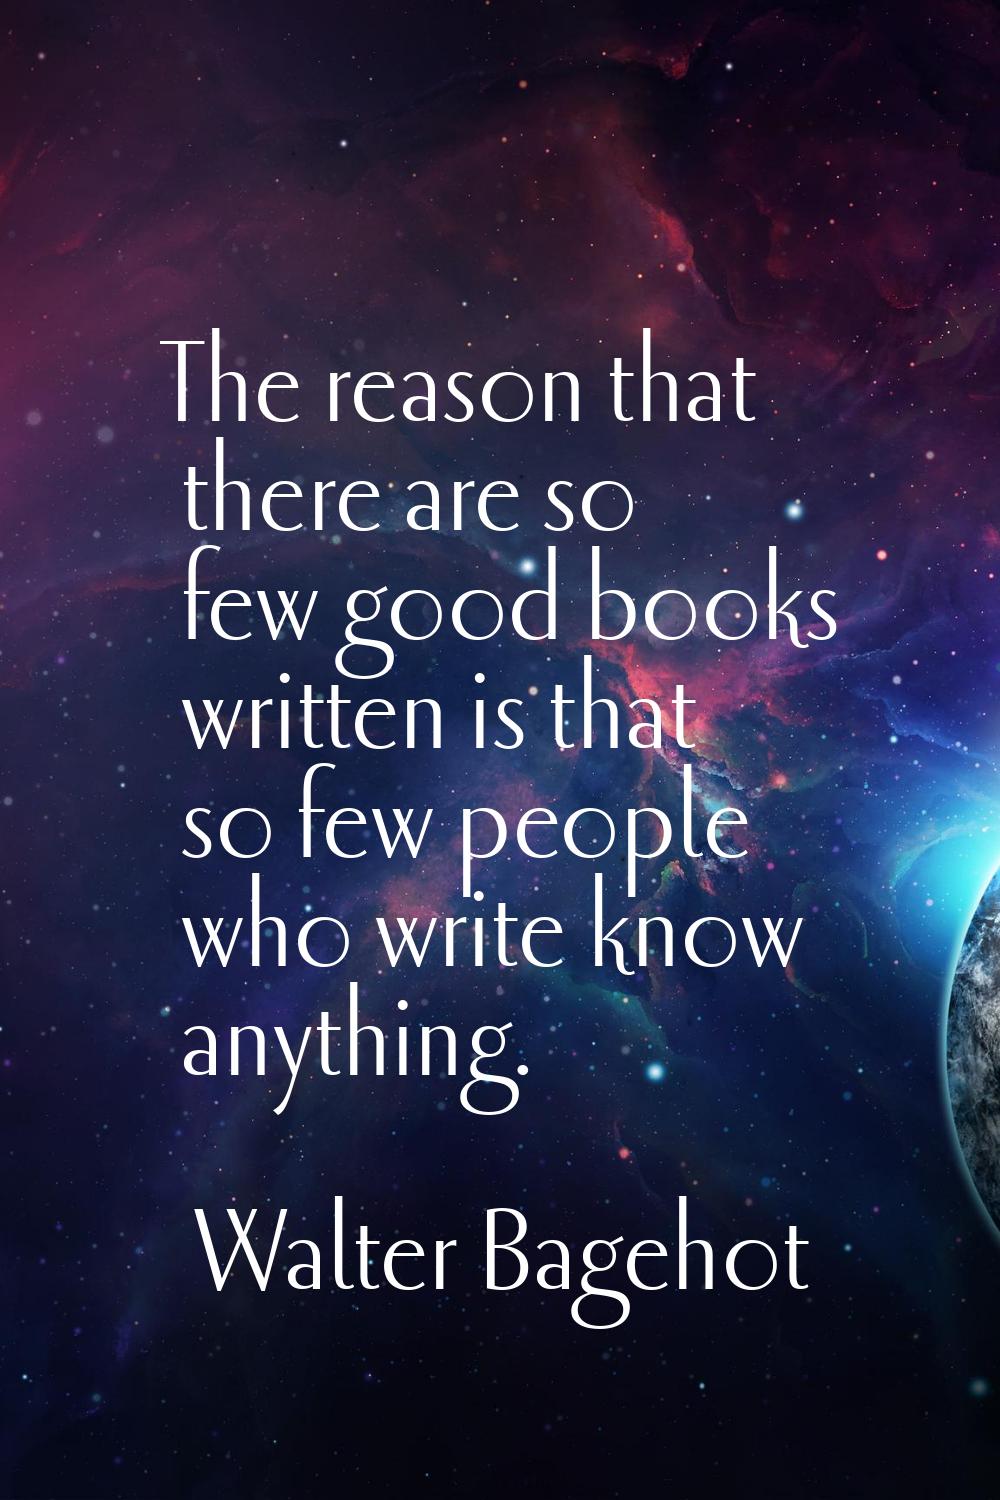 The reason that there are so few good books written is that so few people who write know anything.